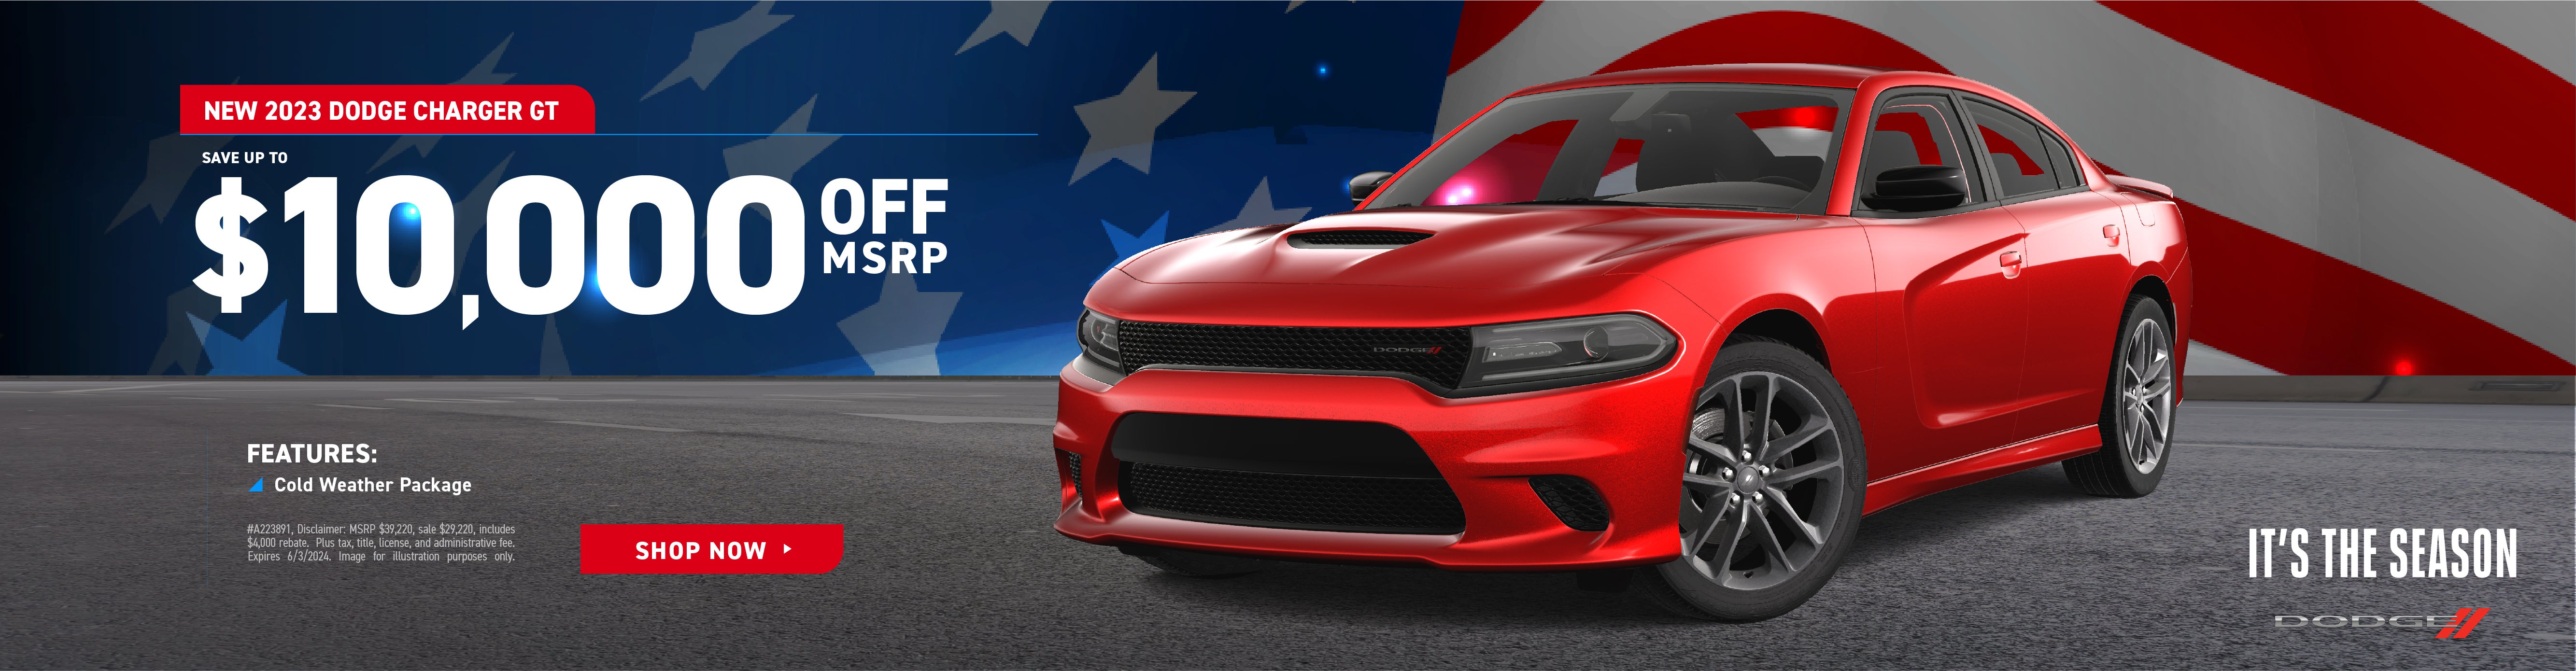 NEW 2023 DODGE CHARGER GT